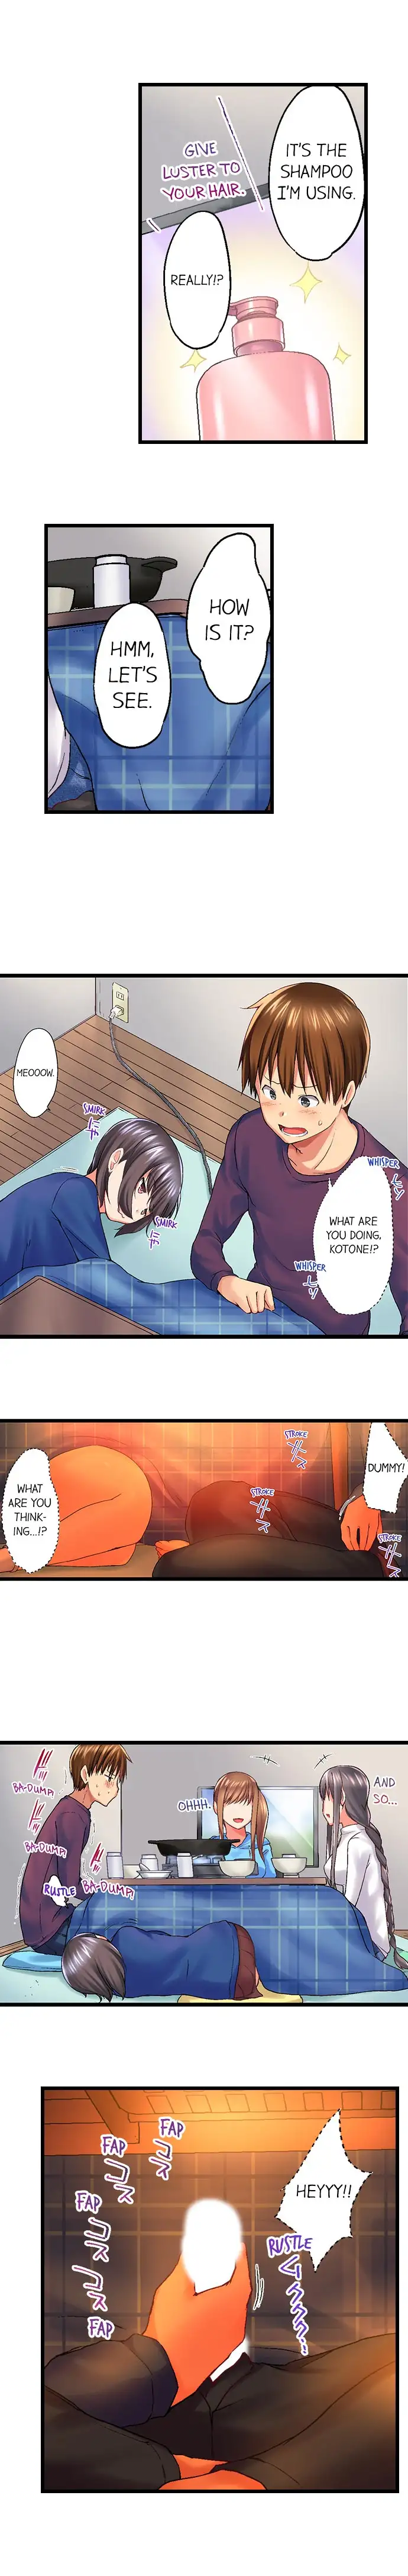 My Brother’s Slipped Inside Me in The Bathtub - Chapter 32 Page 7